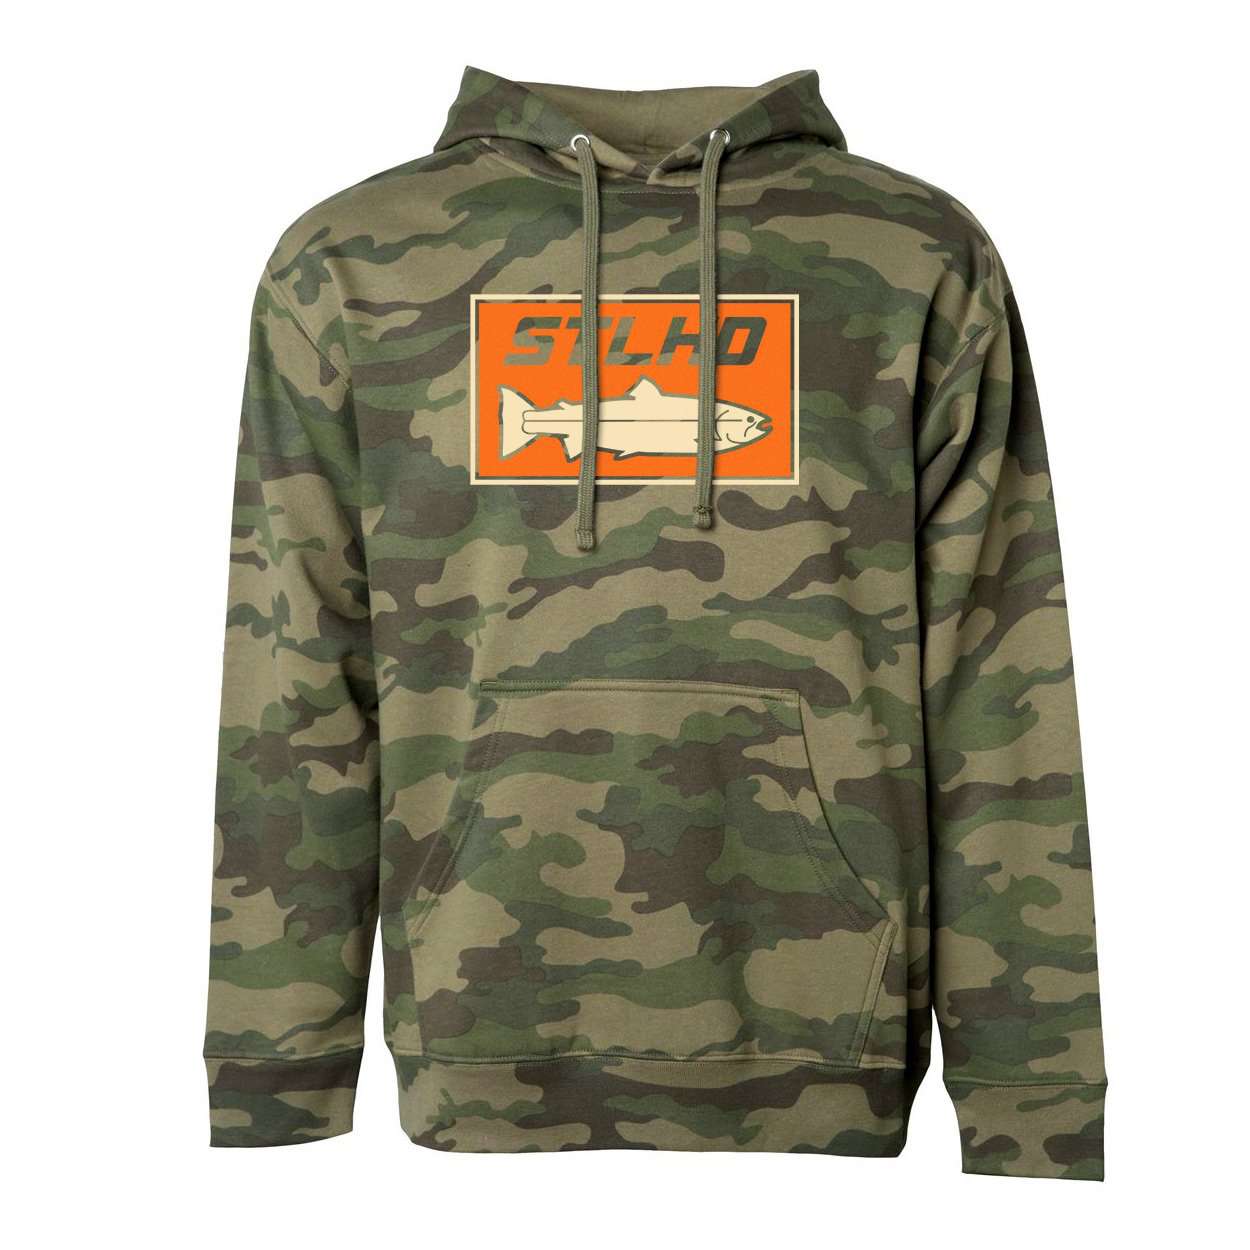 STLHD Men's Woodlands Camo Standard Hoodie - H&H Outfitters